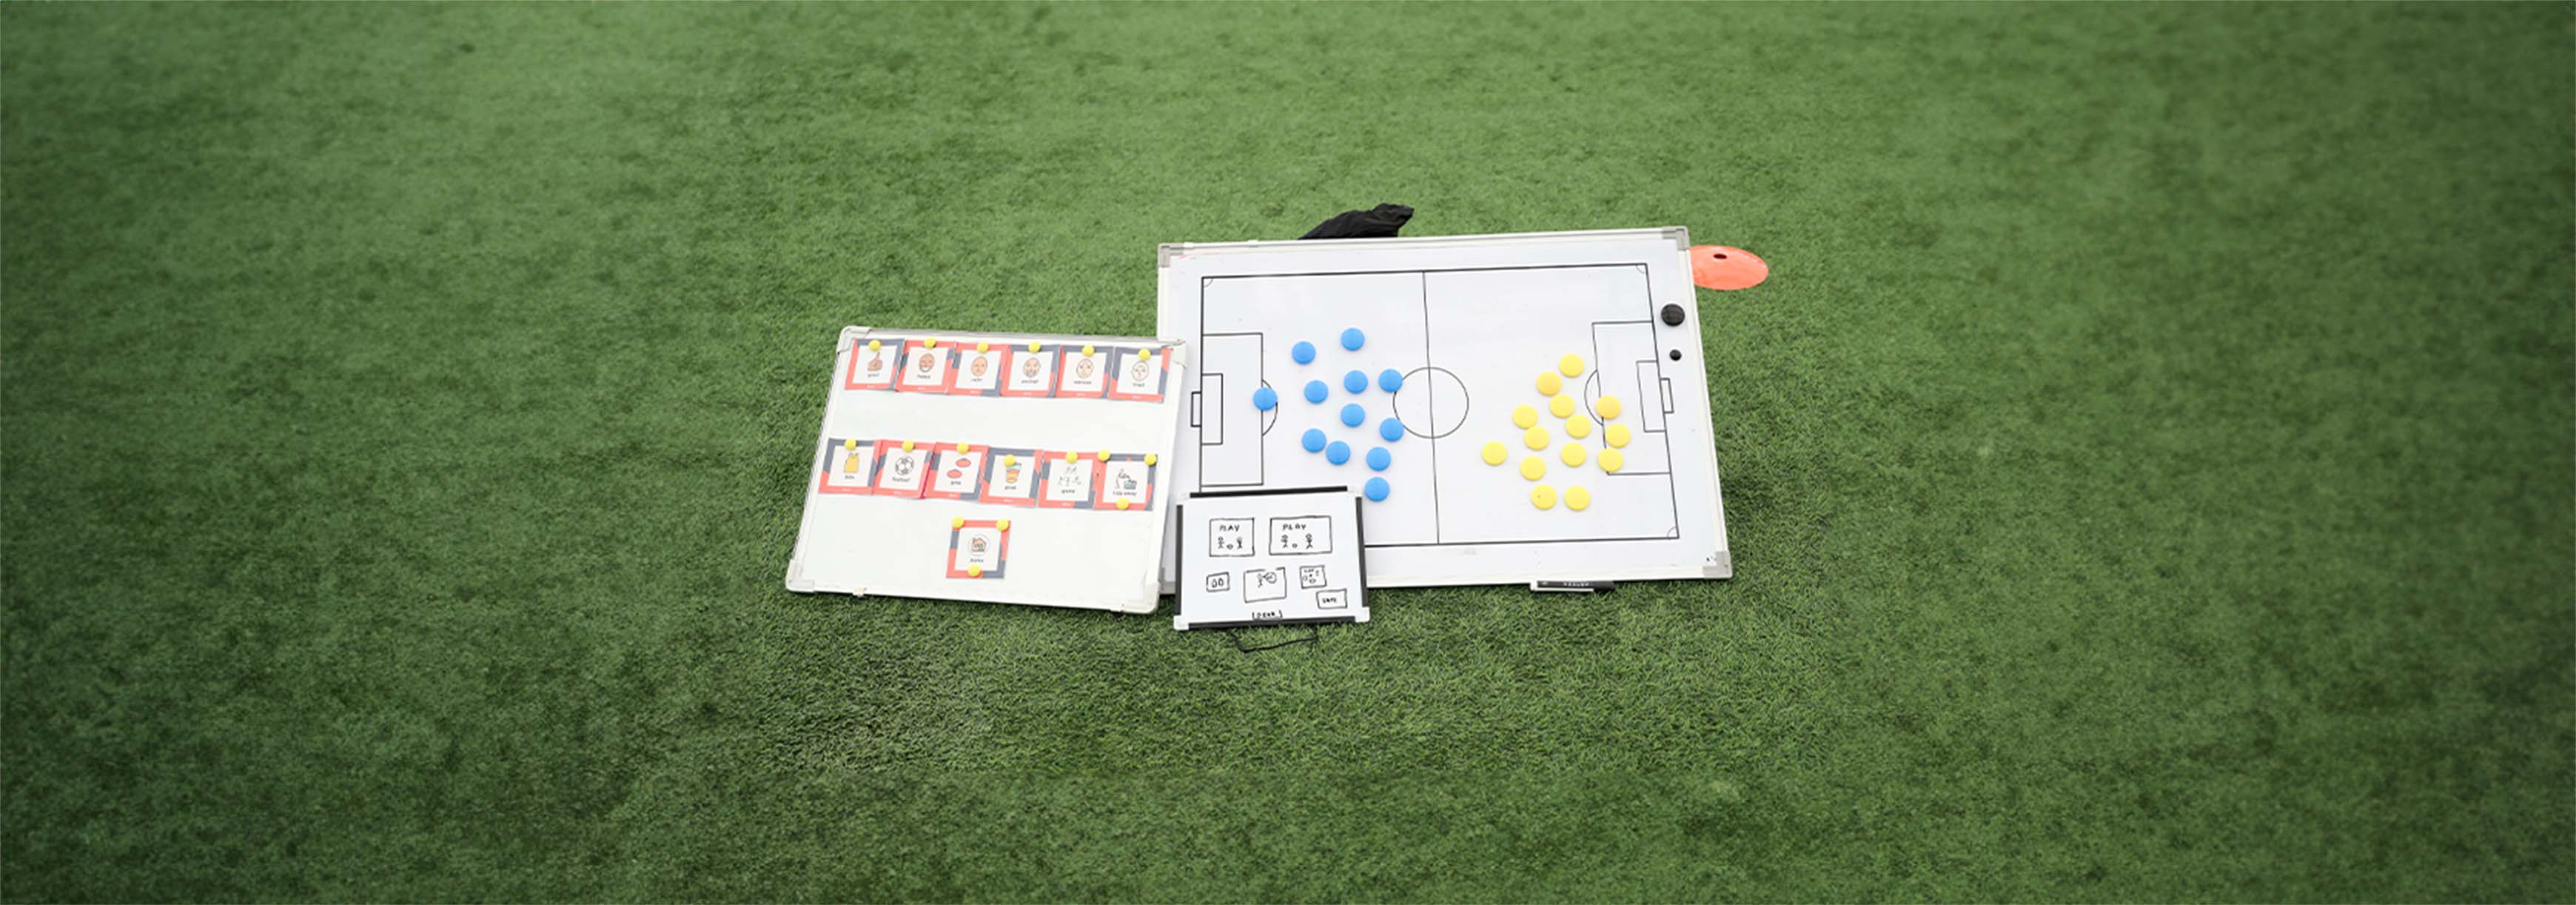 Three whiteboards placed on a 3G pitch. One shows flashcards, one shows the layout of the session and the other is used as a tactics board.